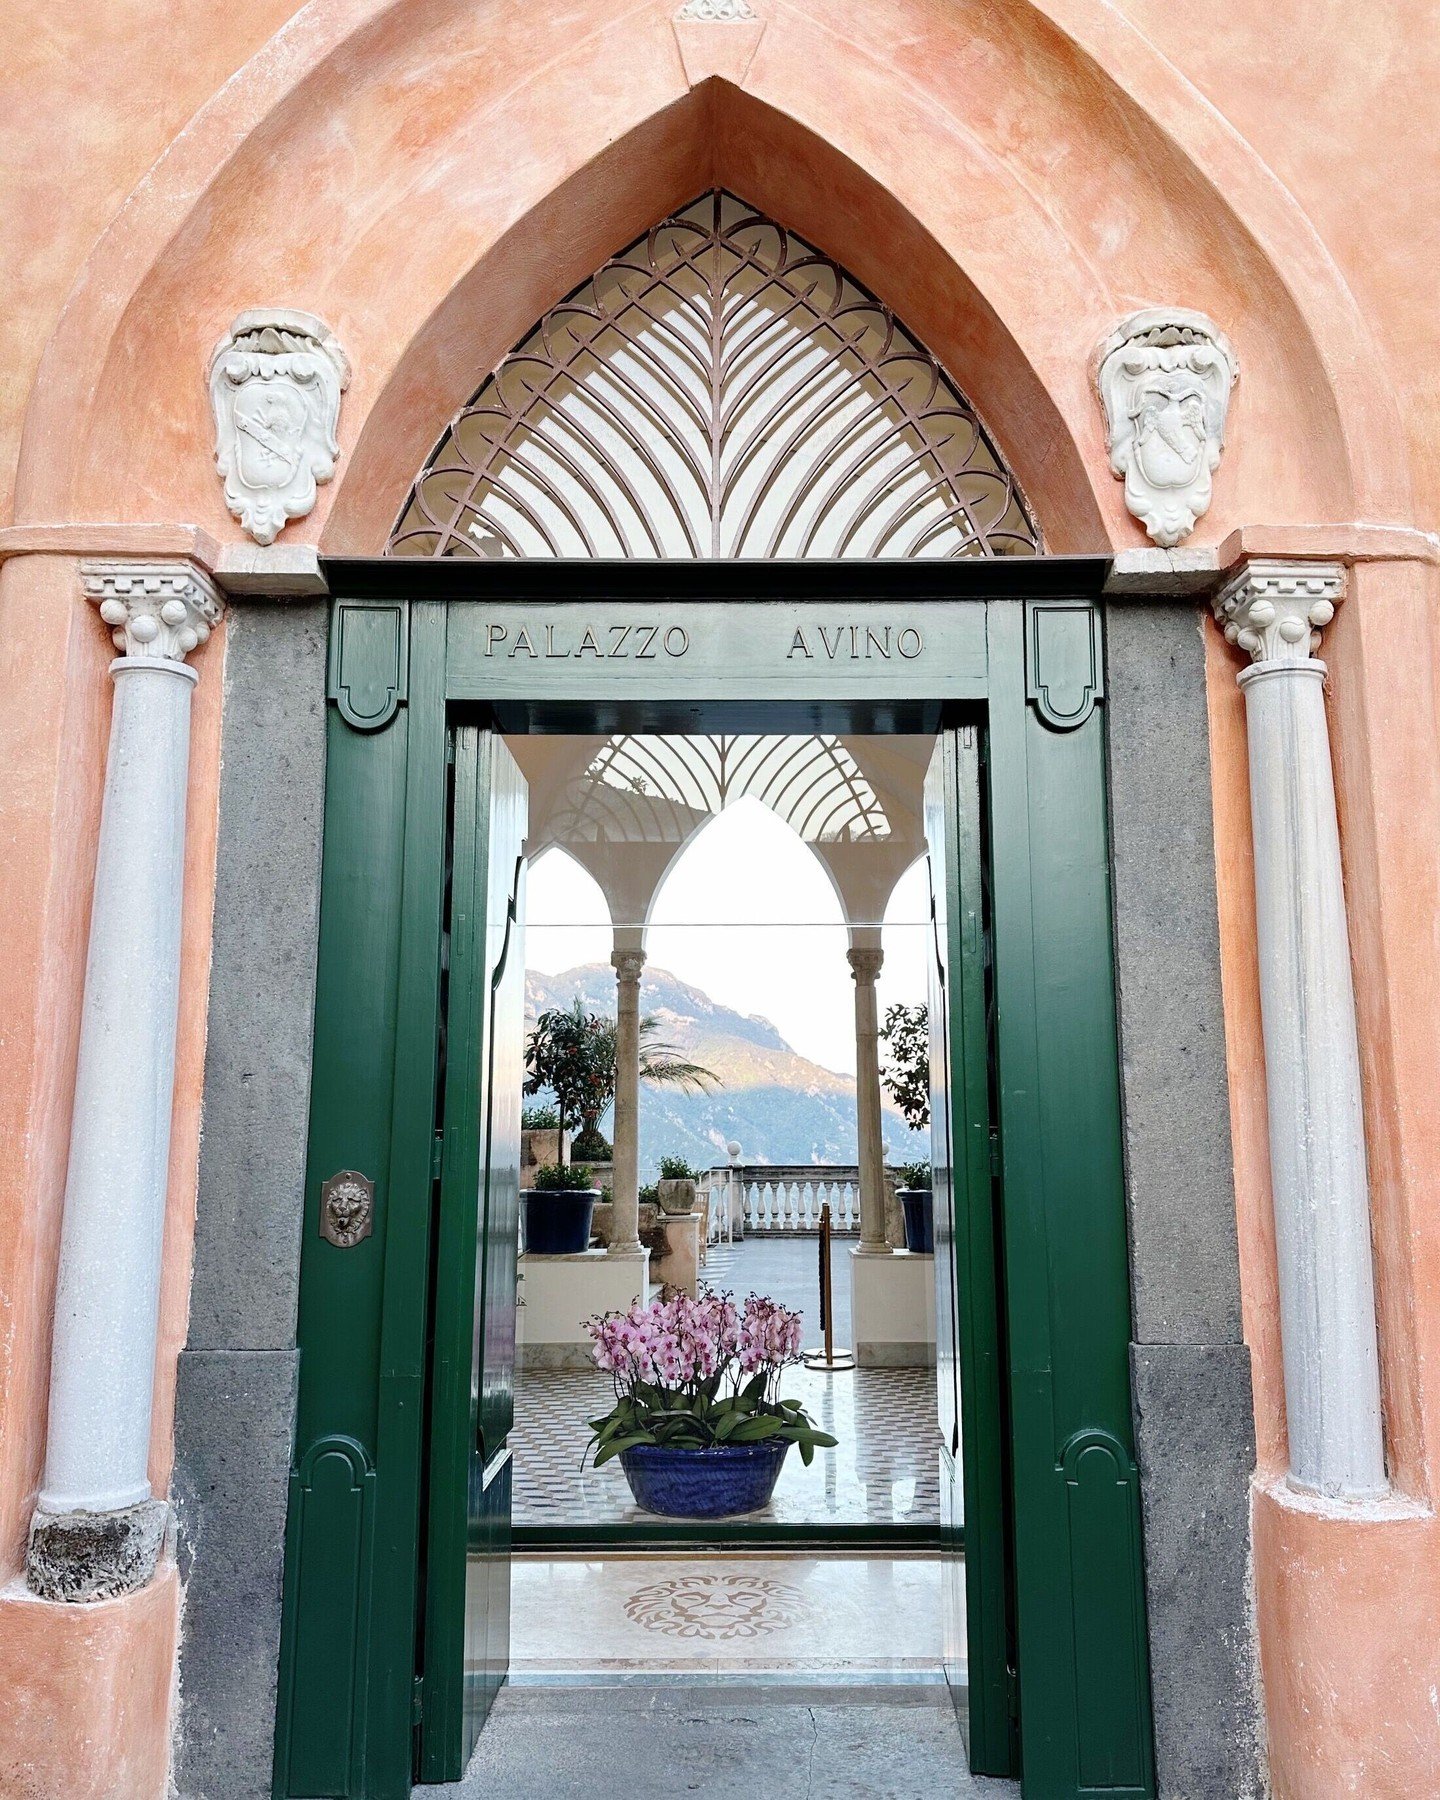 From the moment you step into the iconic &lsquo;pink palace&rsquo; of Palazzo Avino, the stunning views are just the beginning&mdash;the warmth and hospitality of the staff ensure every moment is truly memorable. Tucked away in the medieval hilltop v